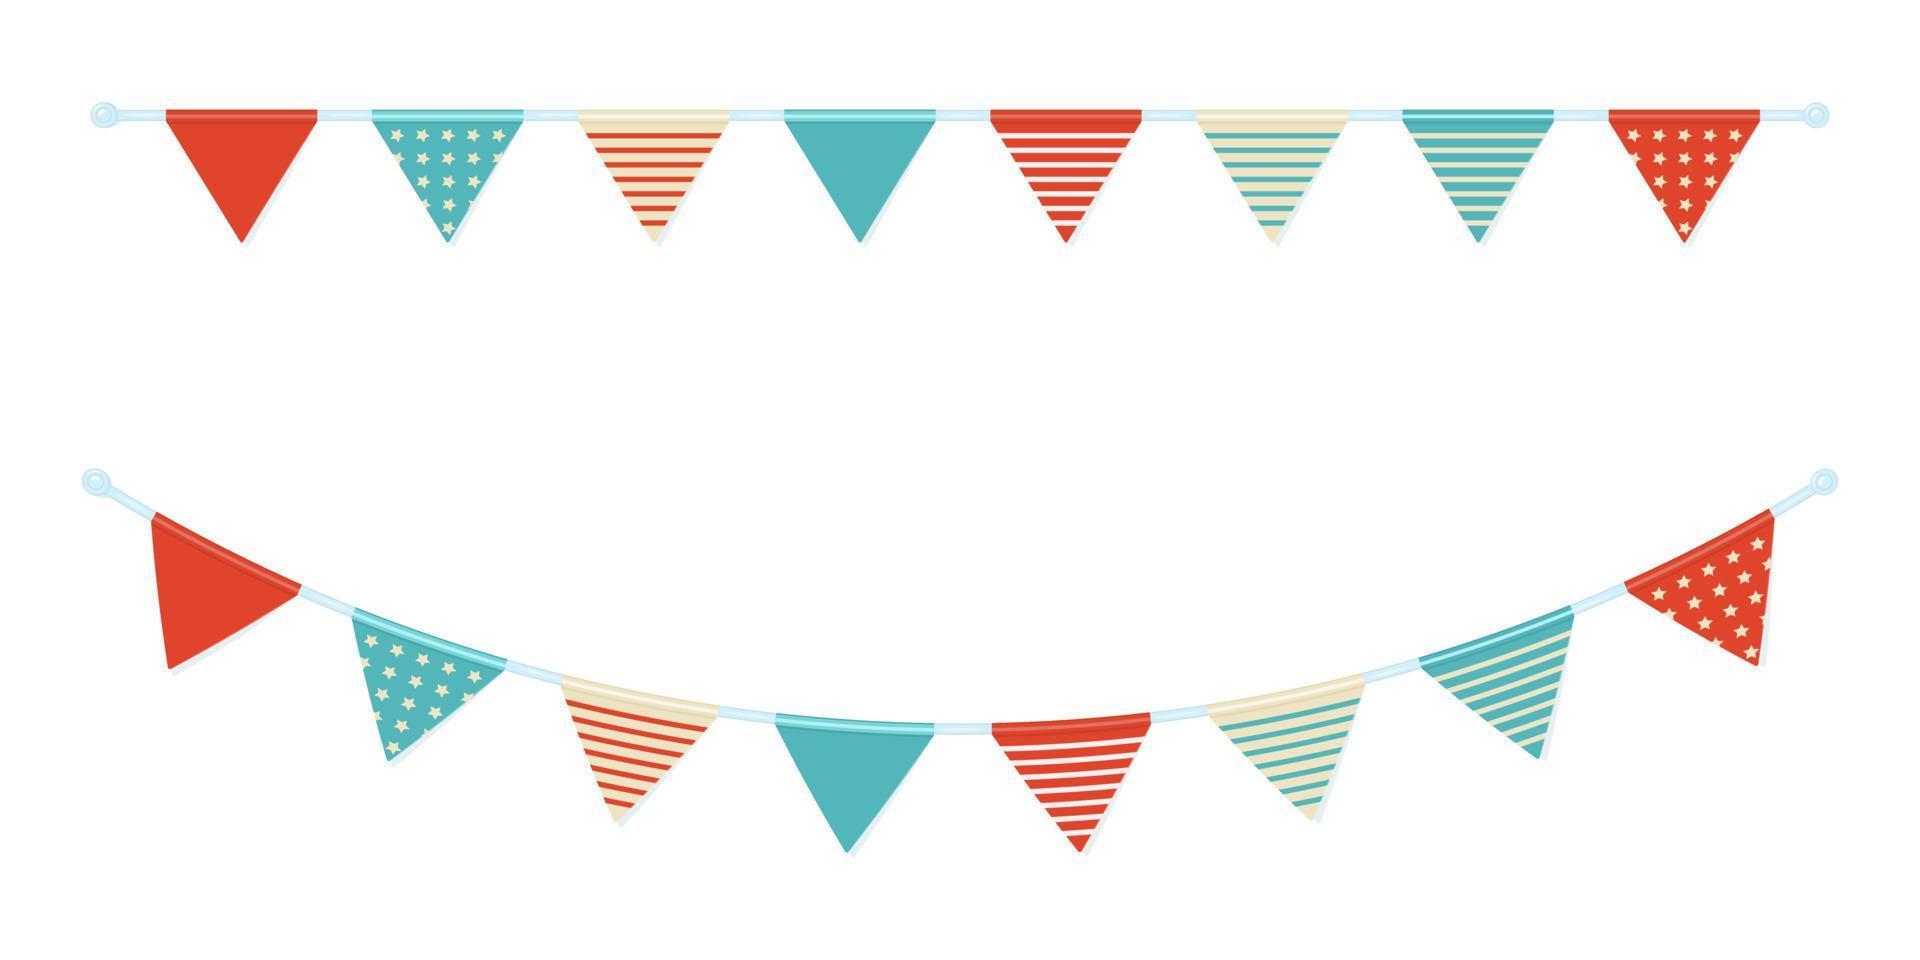 Garland of triangular flags on ribbon in nautical theme. Vector illustration bunting in cartoon style.